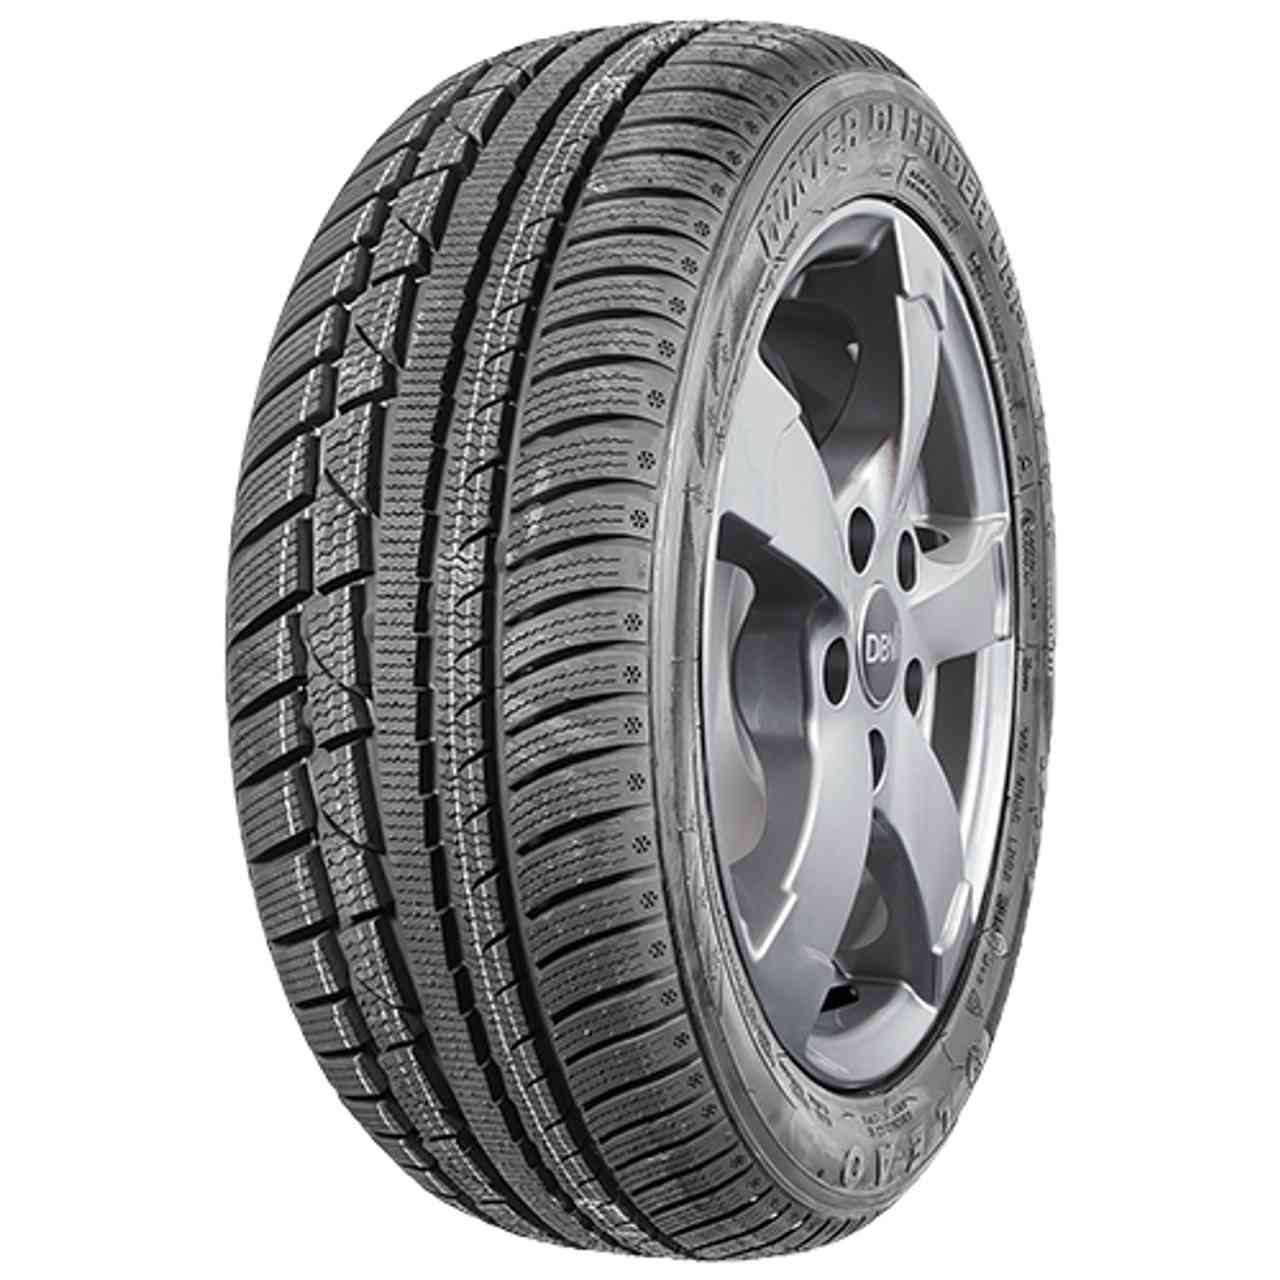 LEAO WINTER DEFENDER UHP 225/50R17 98V BSW